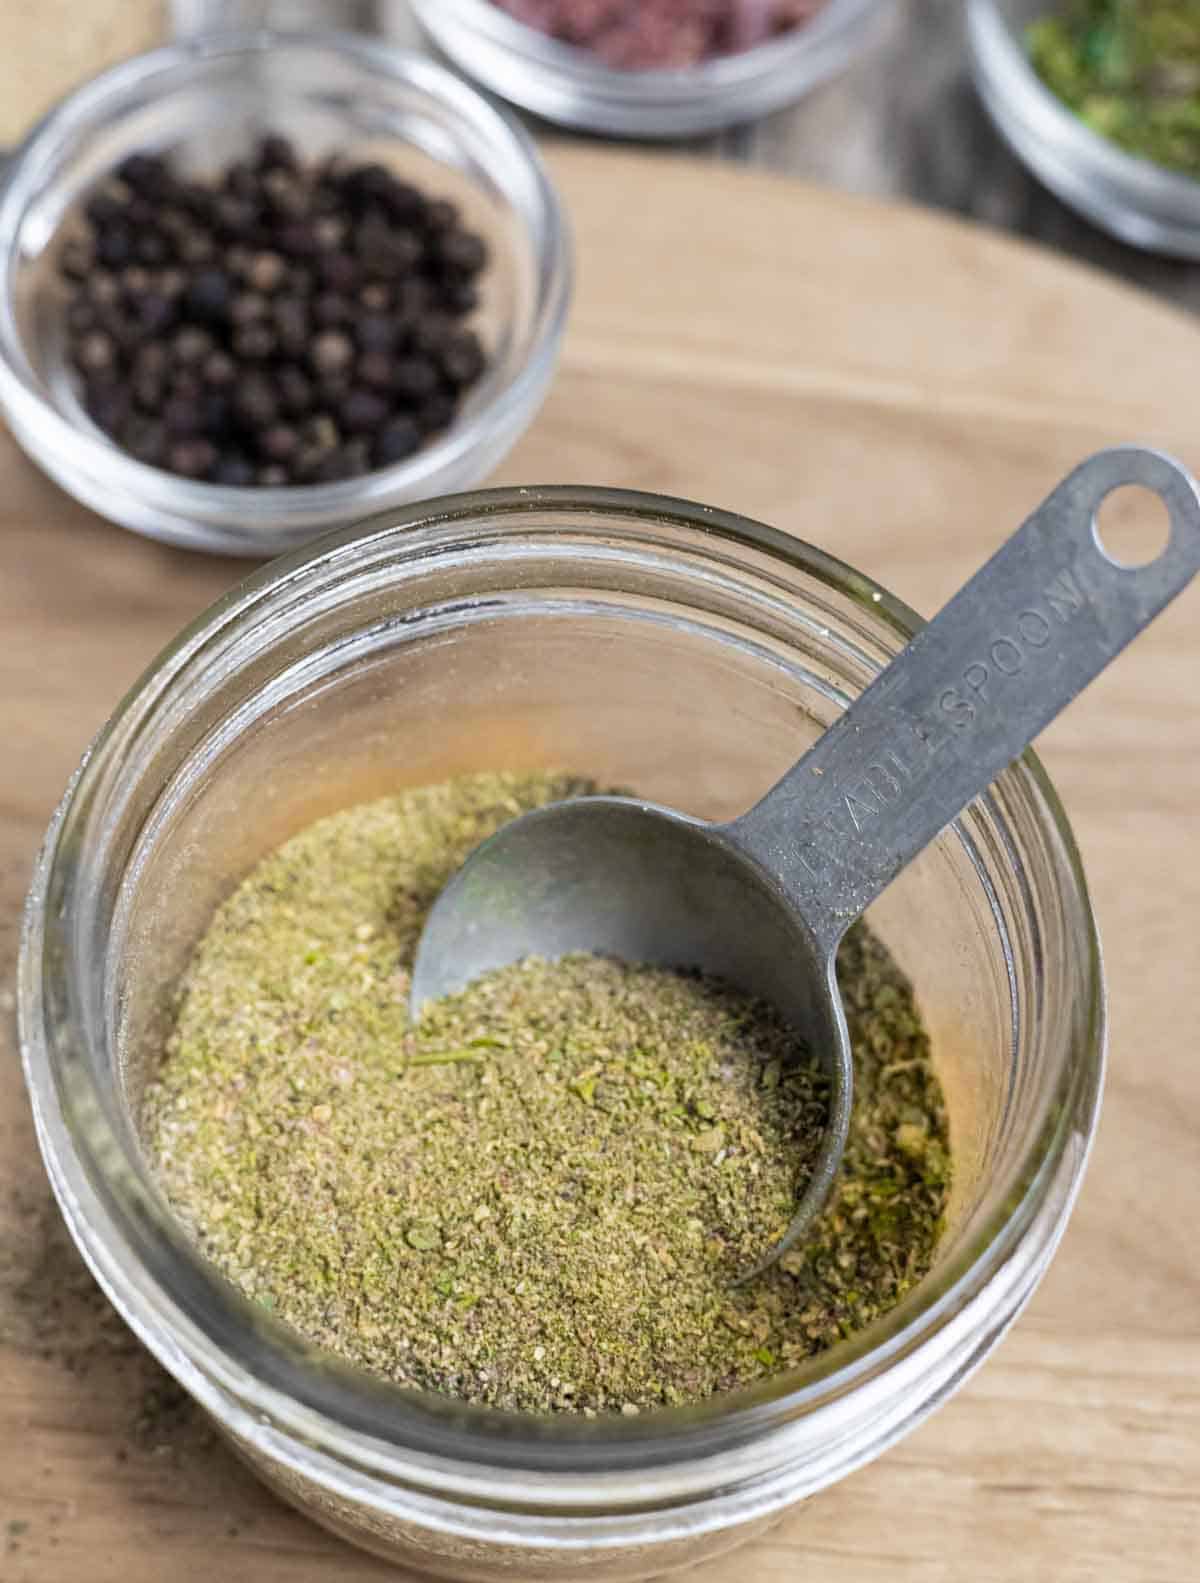 Glass jar of powdered all purpose seasoning with a measuring spoon inside.